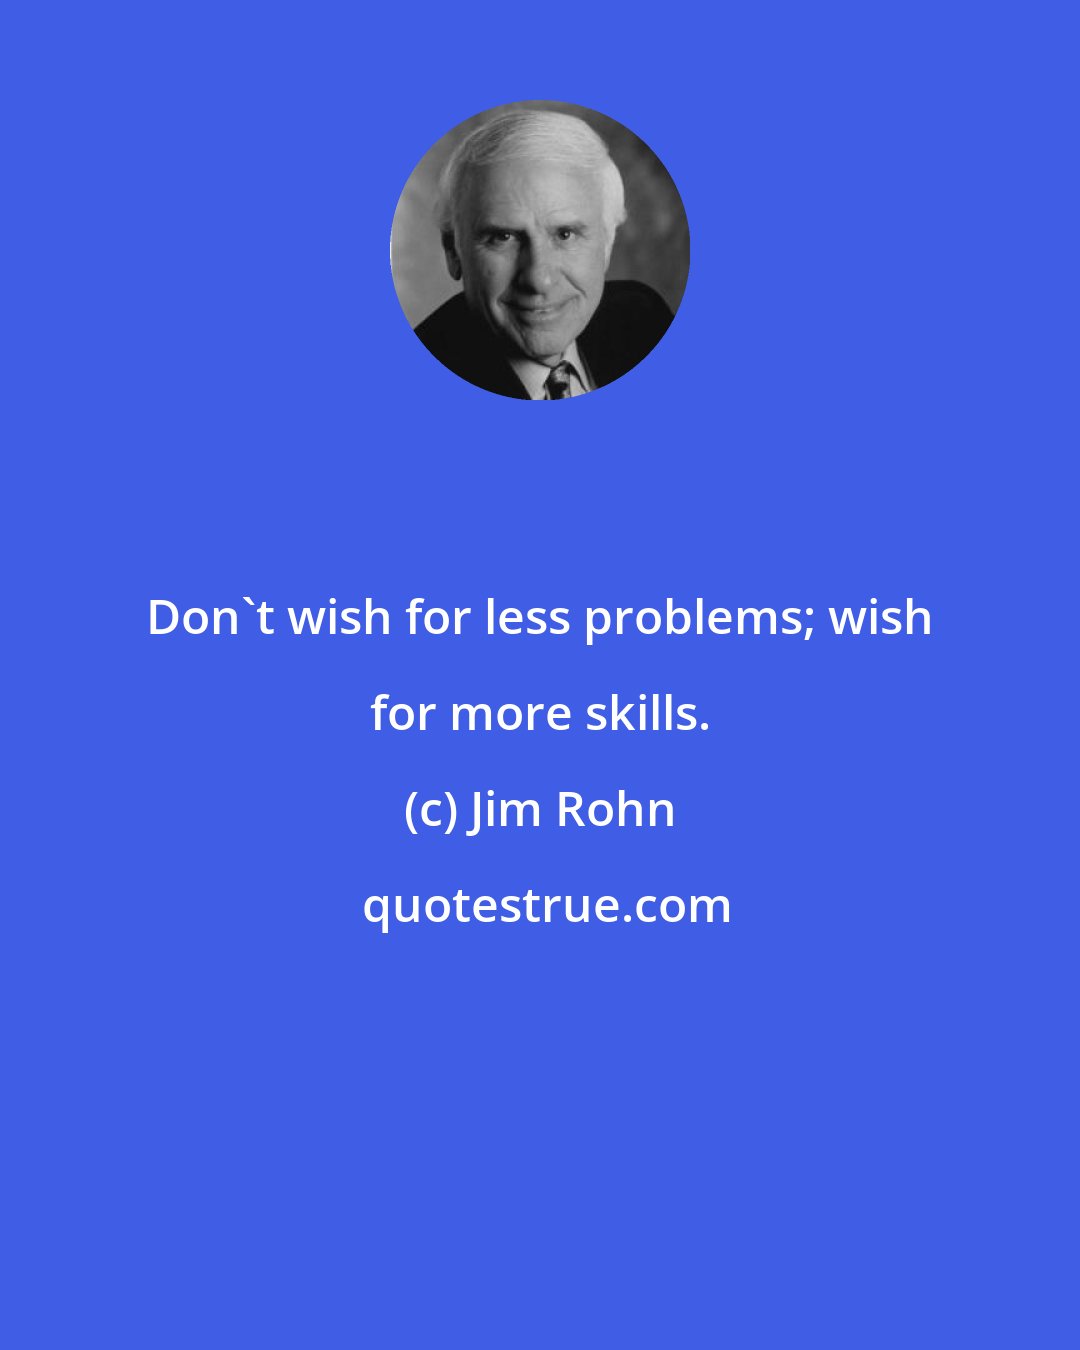 Jim Rohn: Don't wish for less problems; wish for more skills.